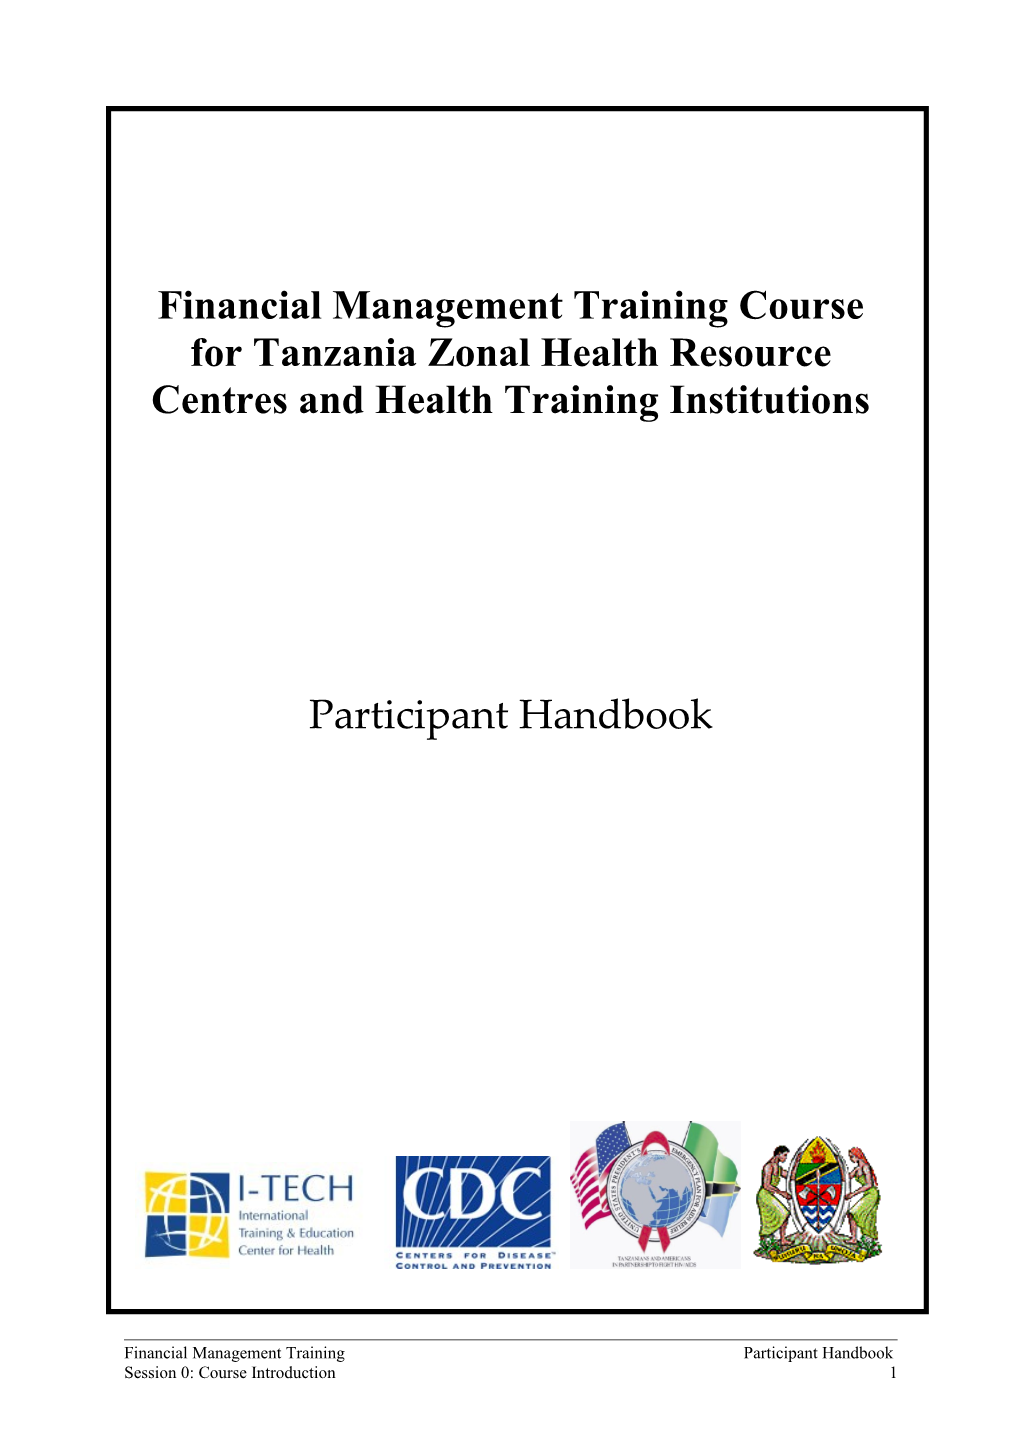 Financial Management Training Course Fortanzania Zonal Health Resource Centres and Health